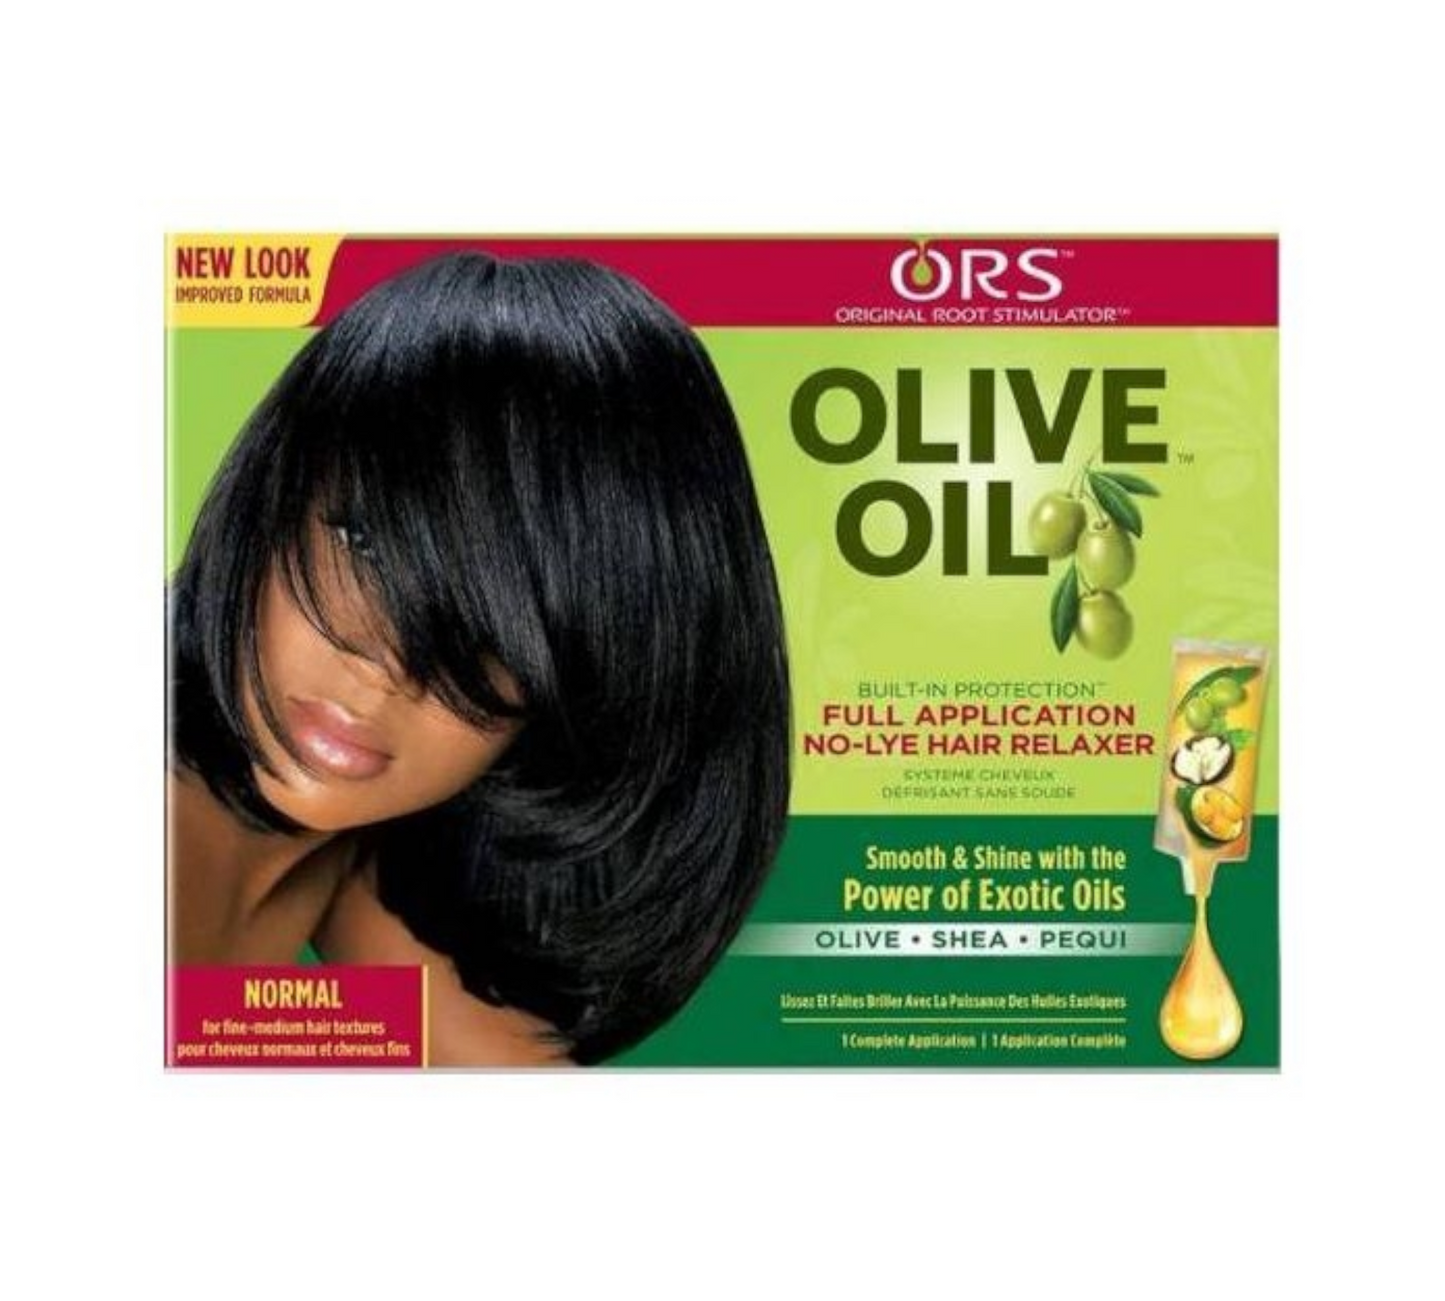 ORS Cupid Beauty Supplies 12.25 Fl.Oz Hair Realxer ORS Olive Oil No-Lye Normal Hair Relaxer